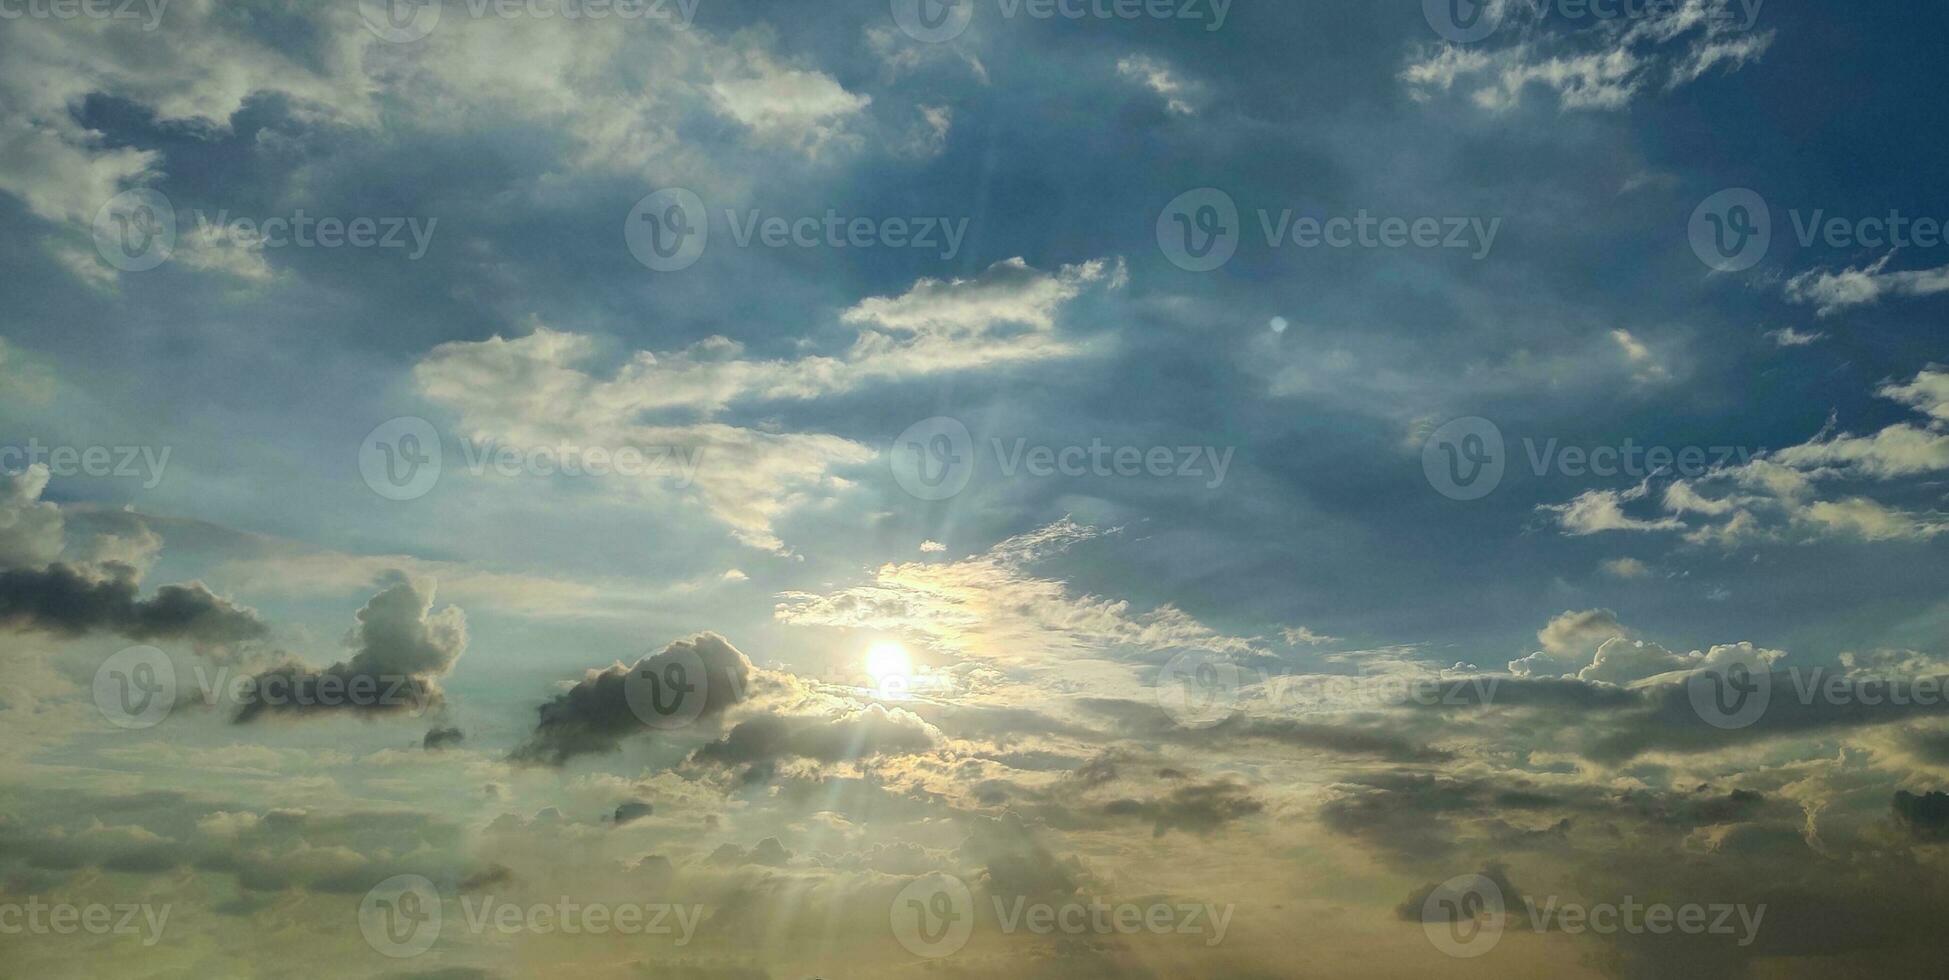 a blue sky with clouds and a few clouds, Blue sky, white cloud time lapse of clouds in the sky, the sun shines through the clouds in this photo, dramatic sky clouds photo